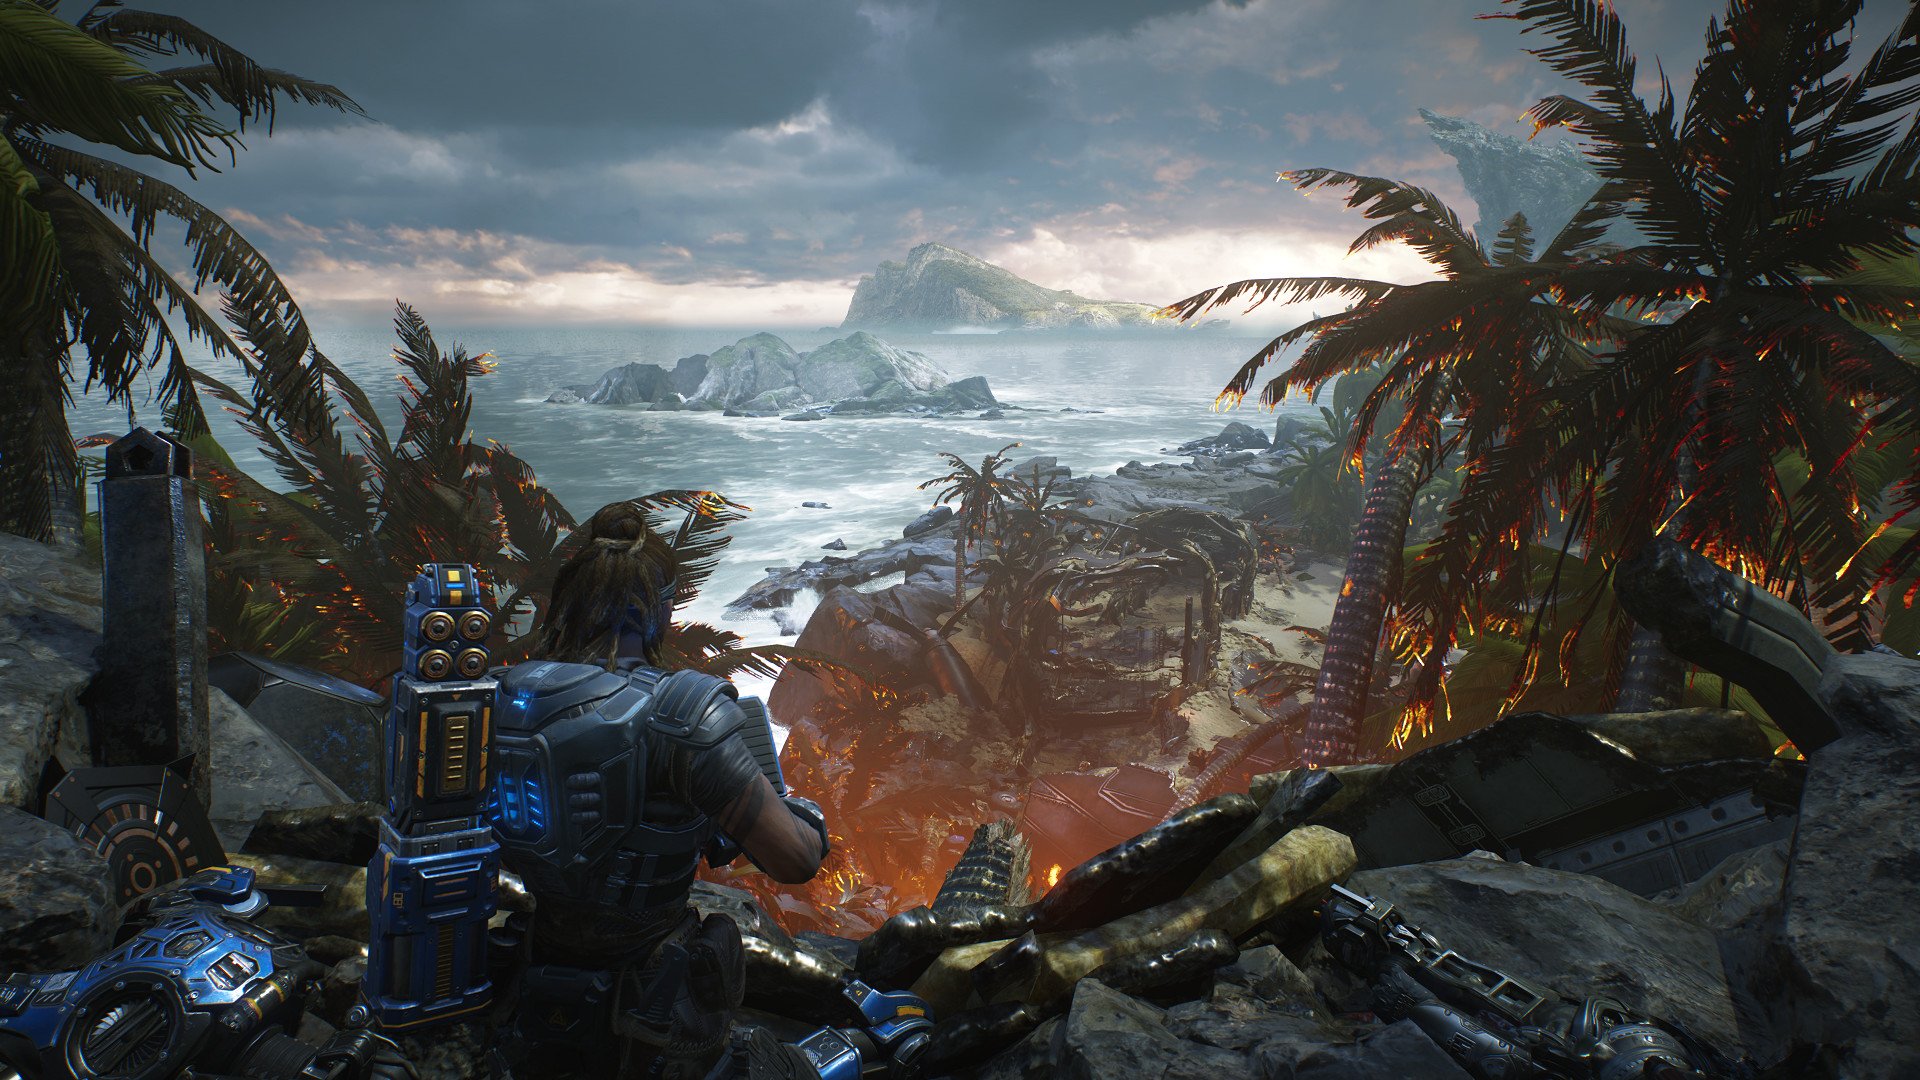 Gears Of War 5' Is Beautiful In A Way Nothing Else On Xbox One Or